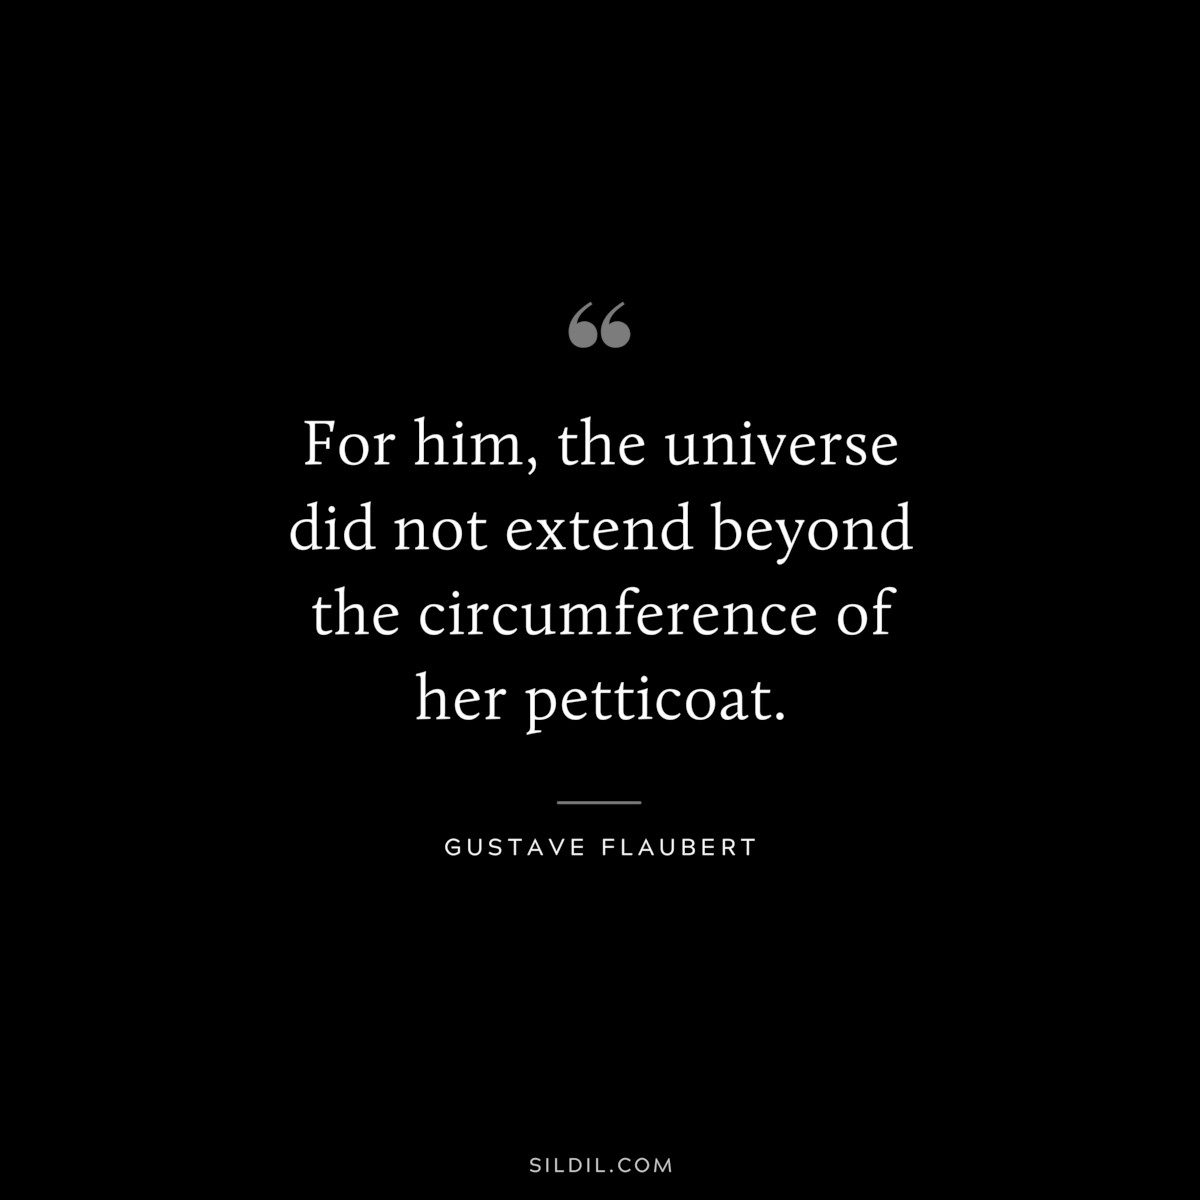 For him, the universe did not extend beyond the circumference of her petticoat. ― Gustave Flaubert